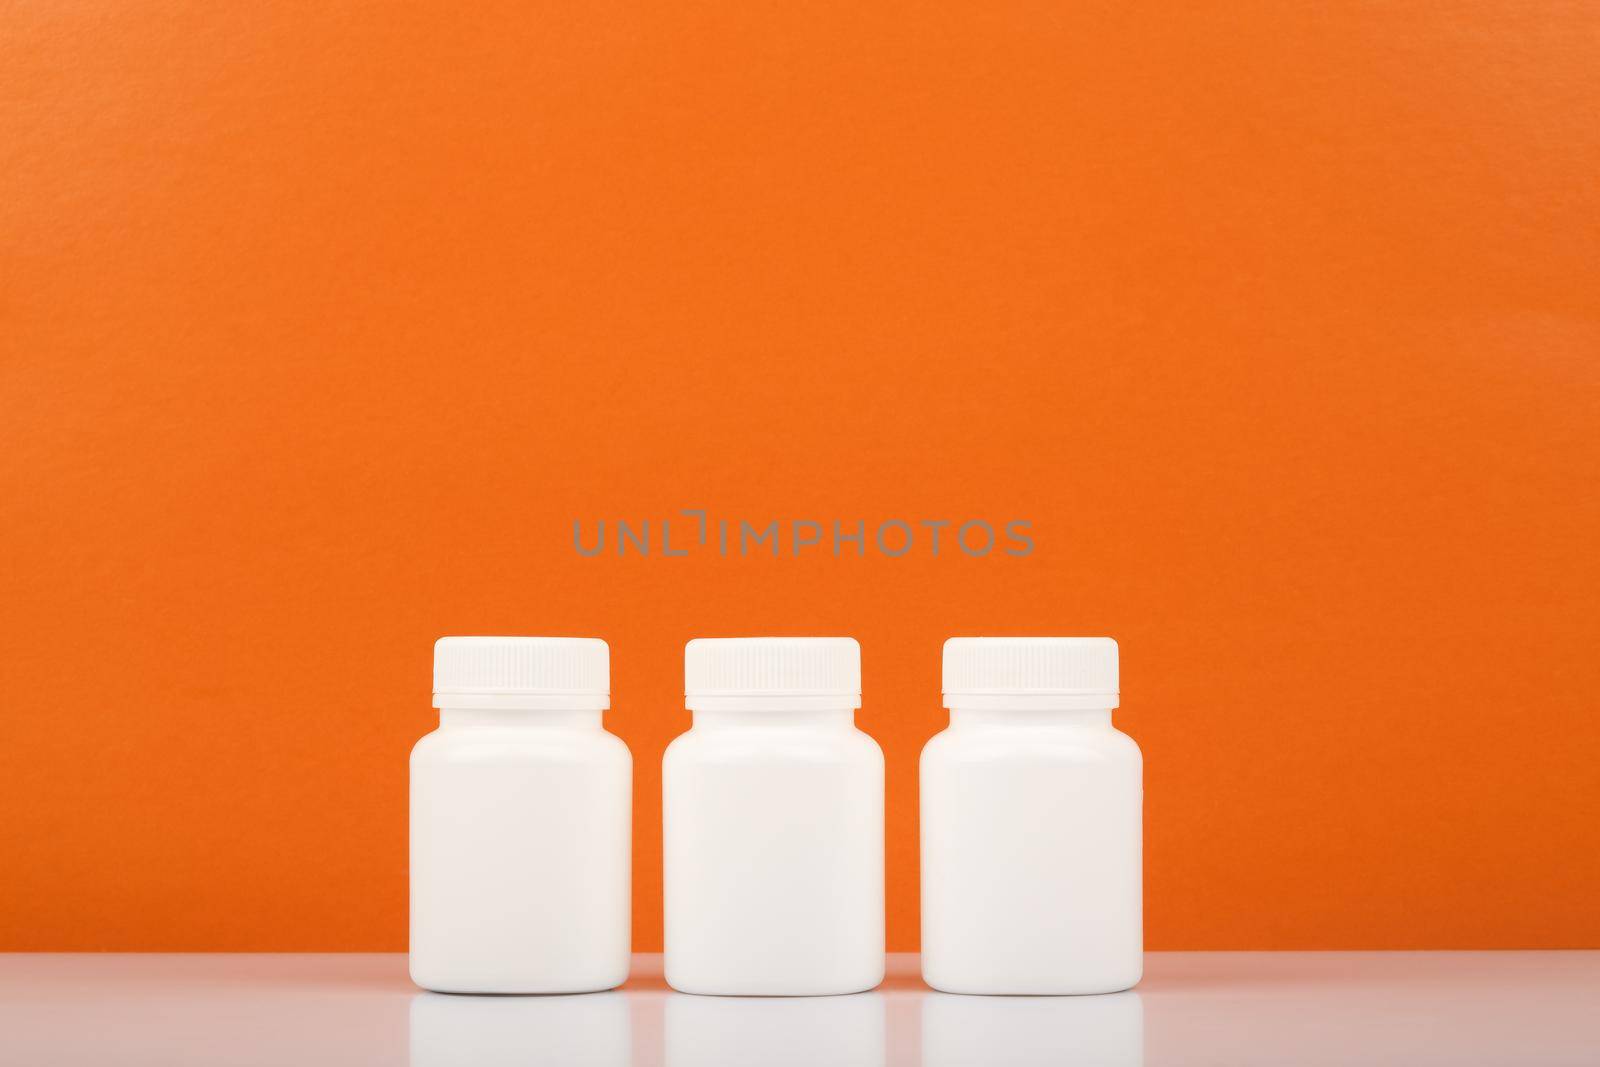 Three white medication bottles in a row against orange background with copy space. Vitamin C concept by Senorina_Irina